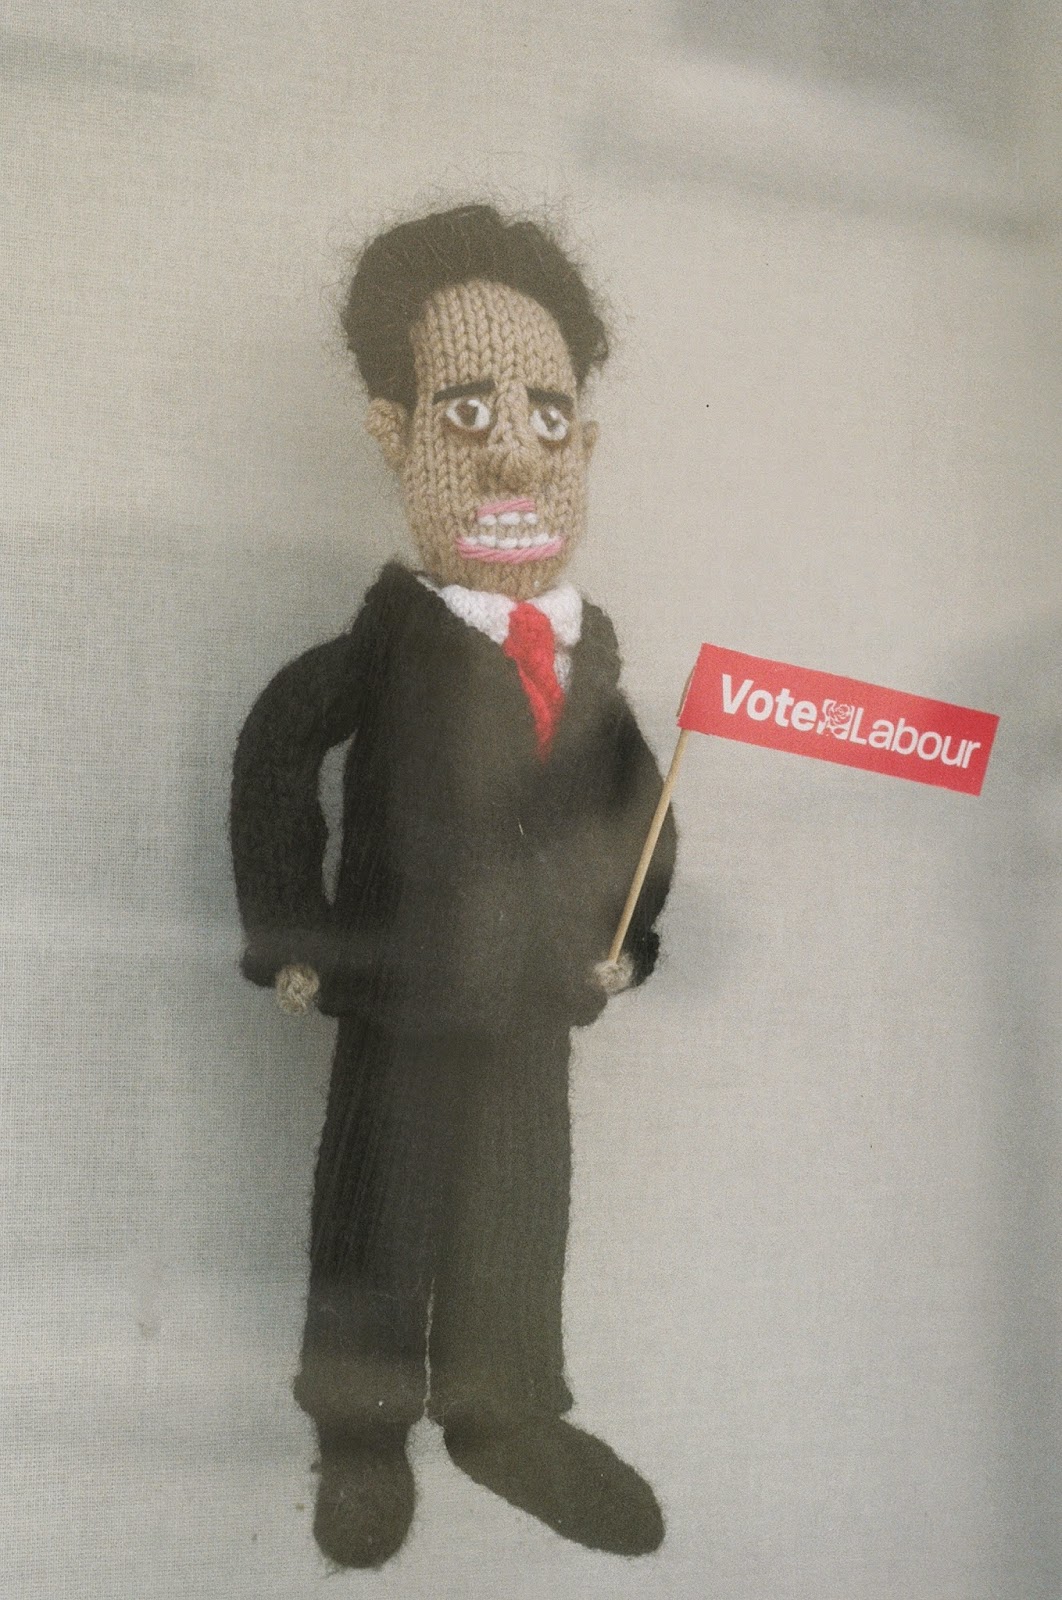  ED MILIBAND, LABOUR PARTY LEADER, PRIME MINISTER IN WAITING, SNP, NICOLA STURGEON, ED BALLS, COALITION, HUNG PARLIAMENT, 2015 GENERAL ELECTION, CONFIDENCE AND SUPPLY, DEAL, KENT © VAC 100 DAYS 4 MILLION CONVERSATIONS 